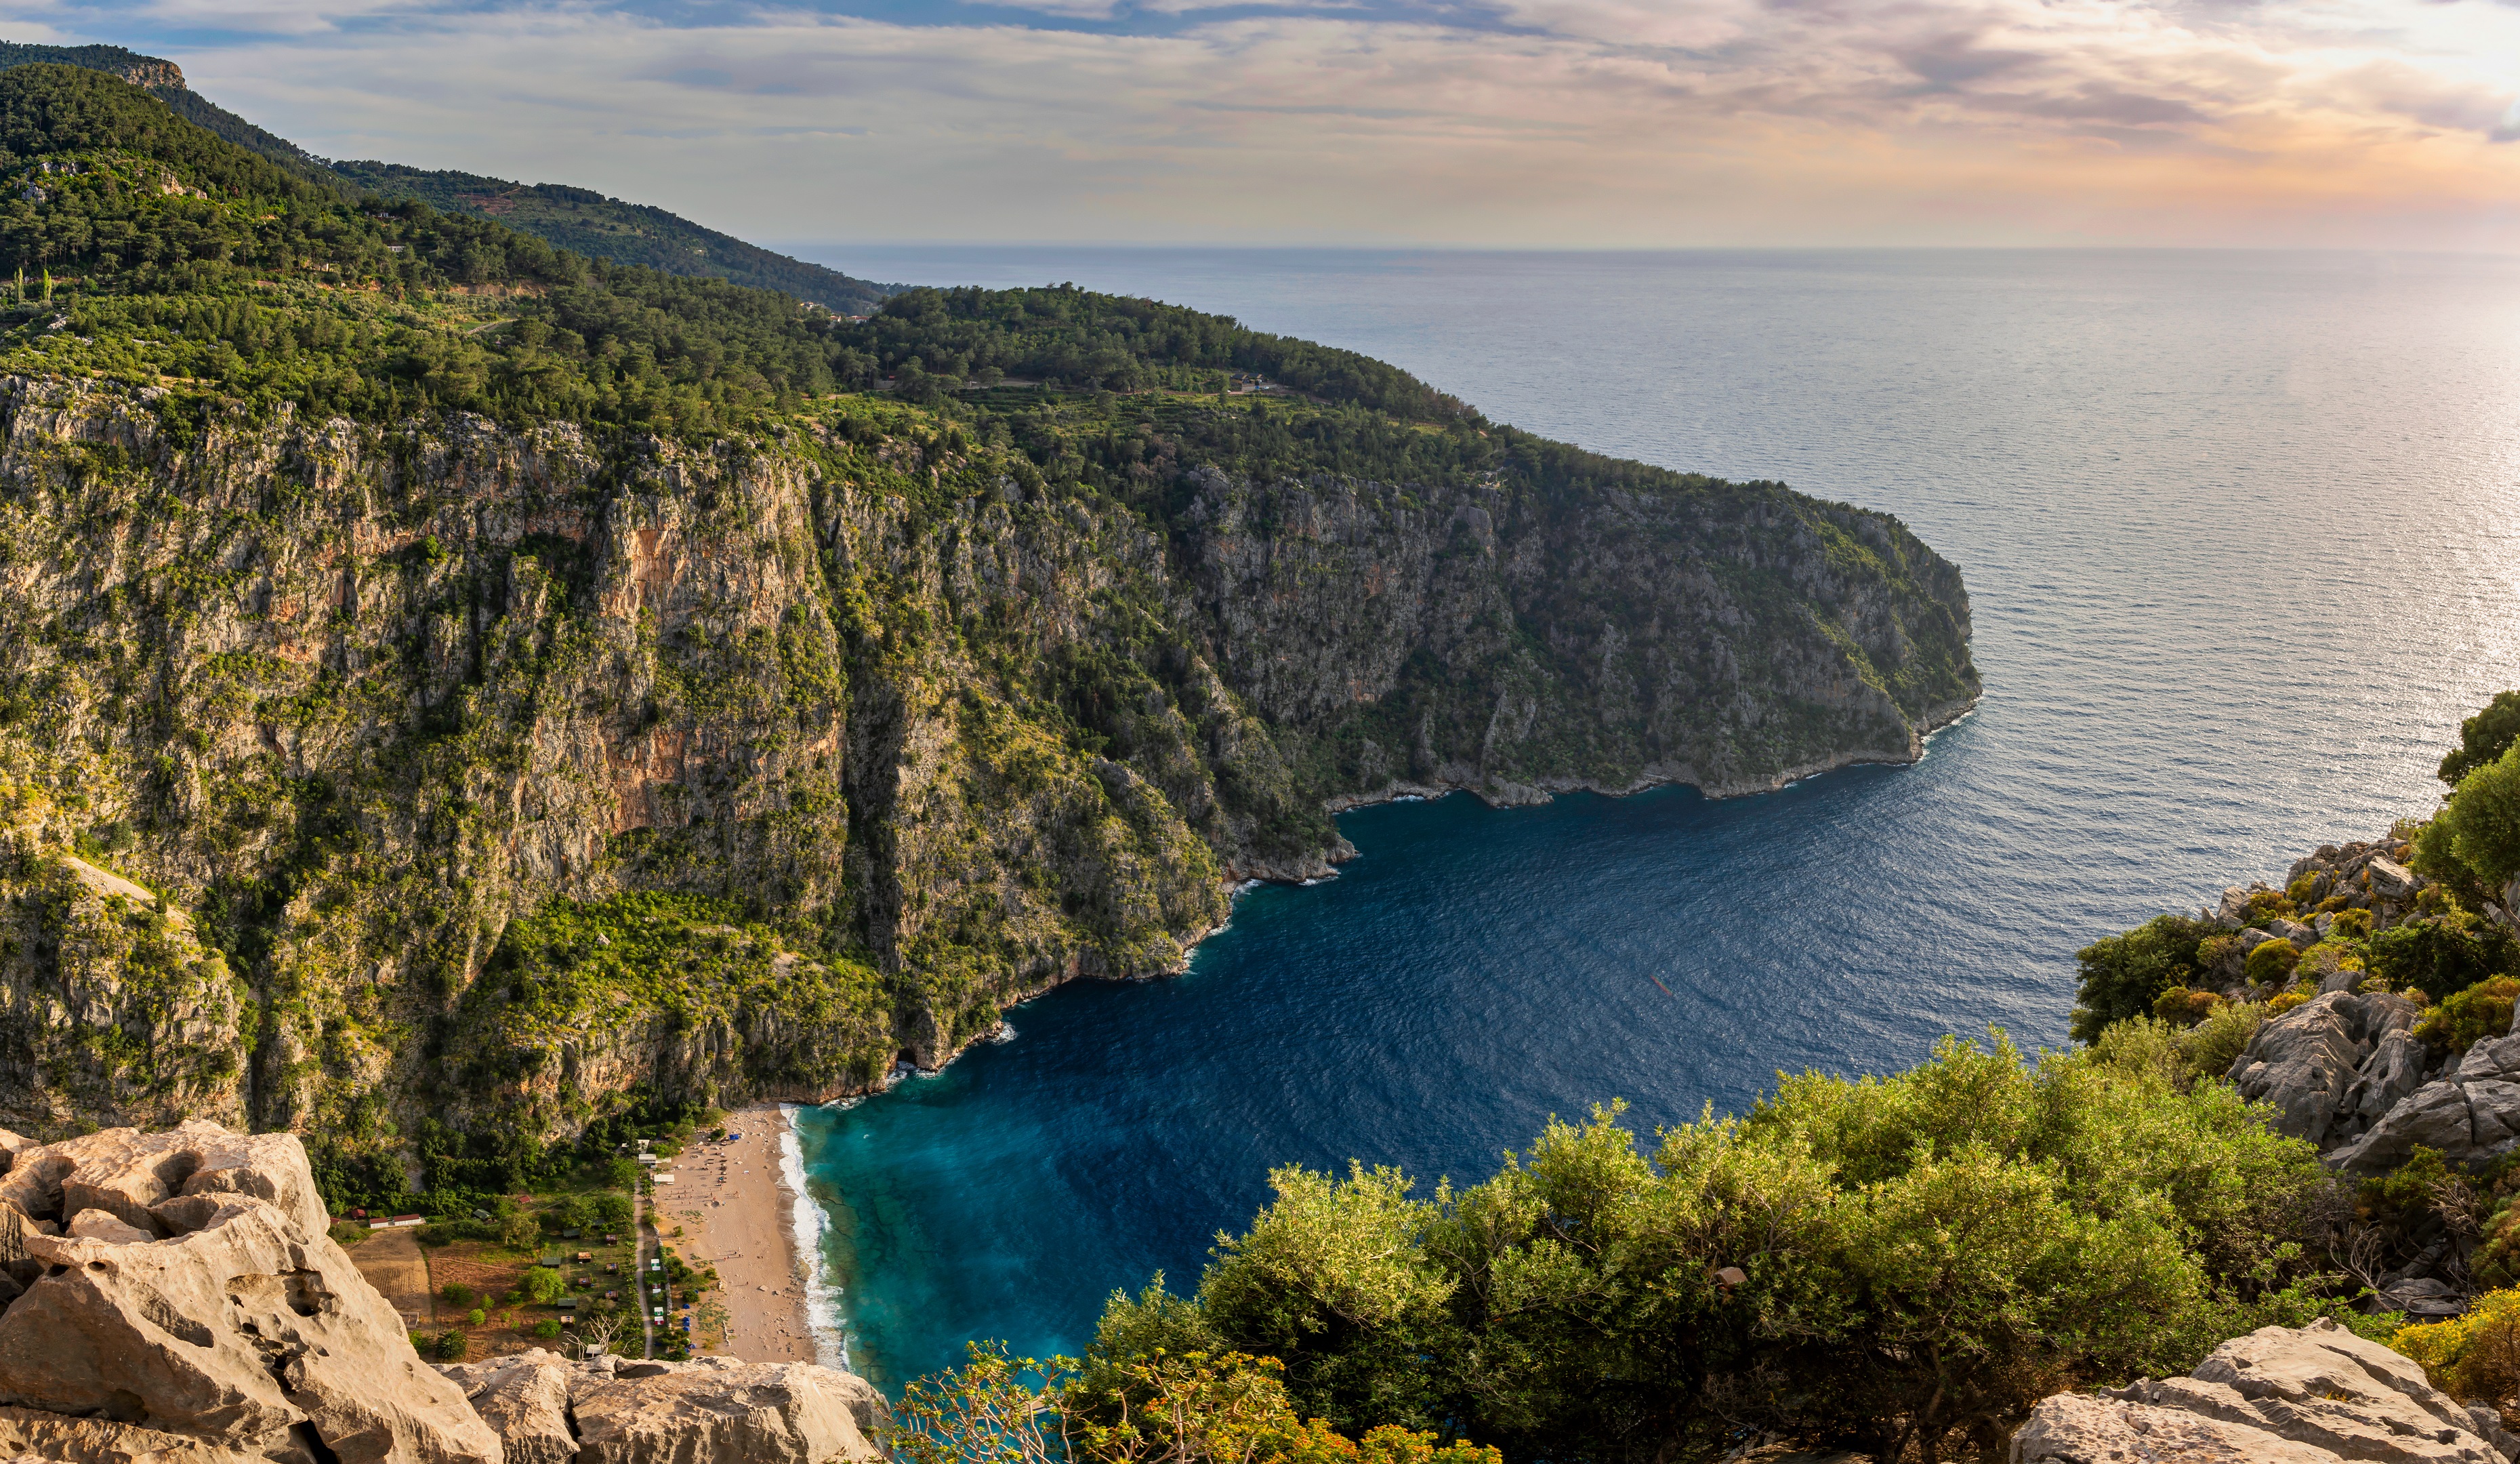 General 3719x2160 landscape sea beach ocean view Turkey Butterfly Valley 4K jungle forest mountain top mountain view water nature Fethiye Mugla